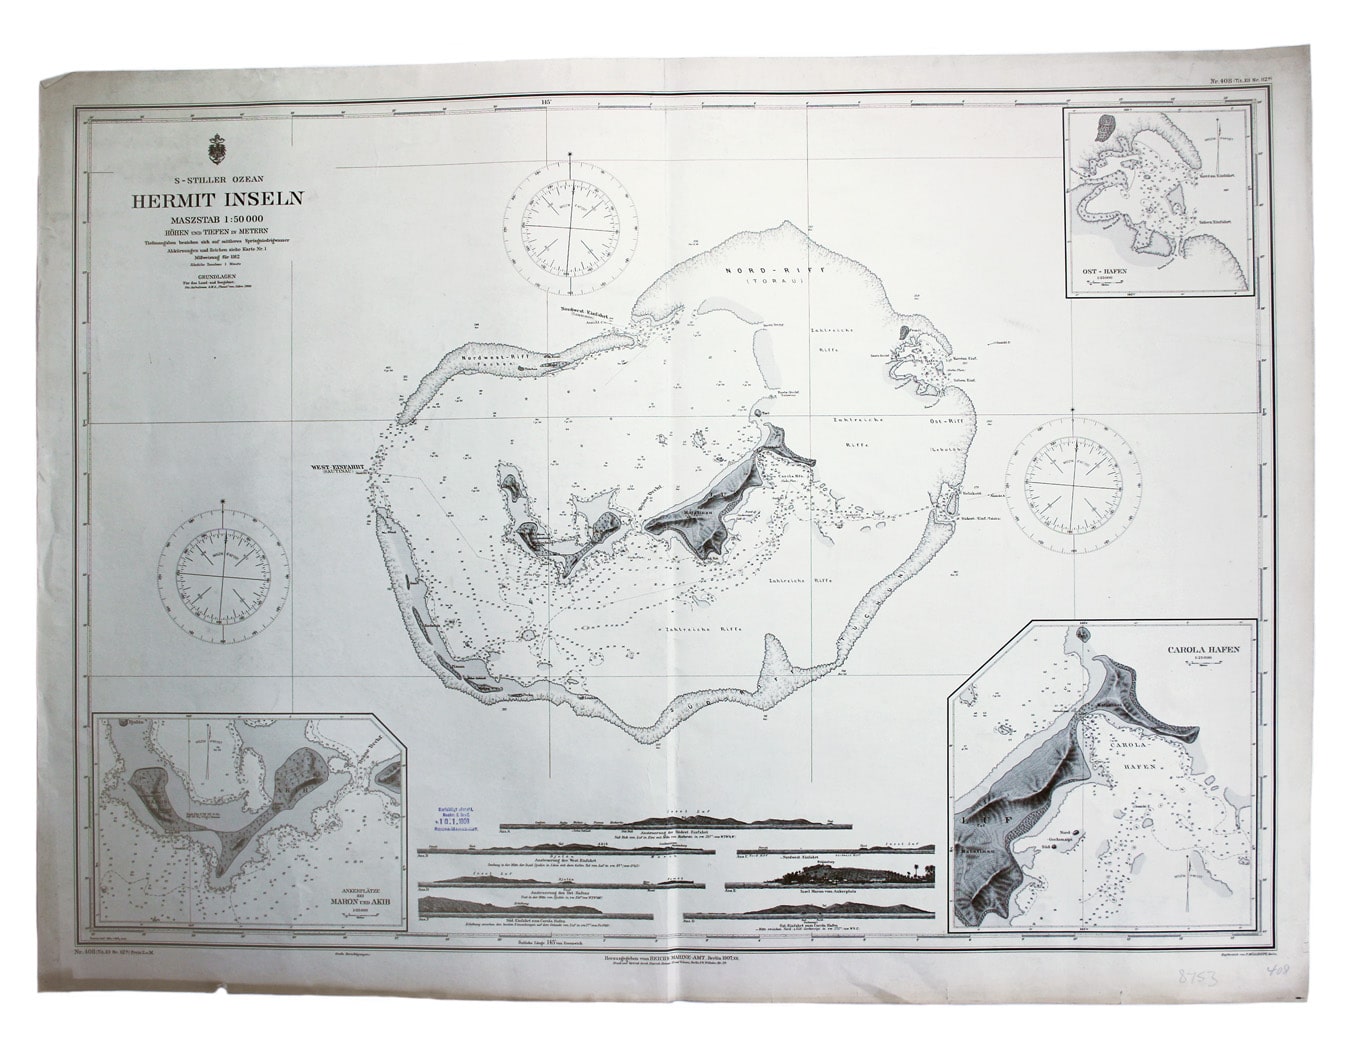 German Naval Chart of The Hermit Islands, Papua New Guinea